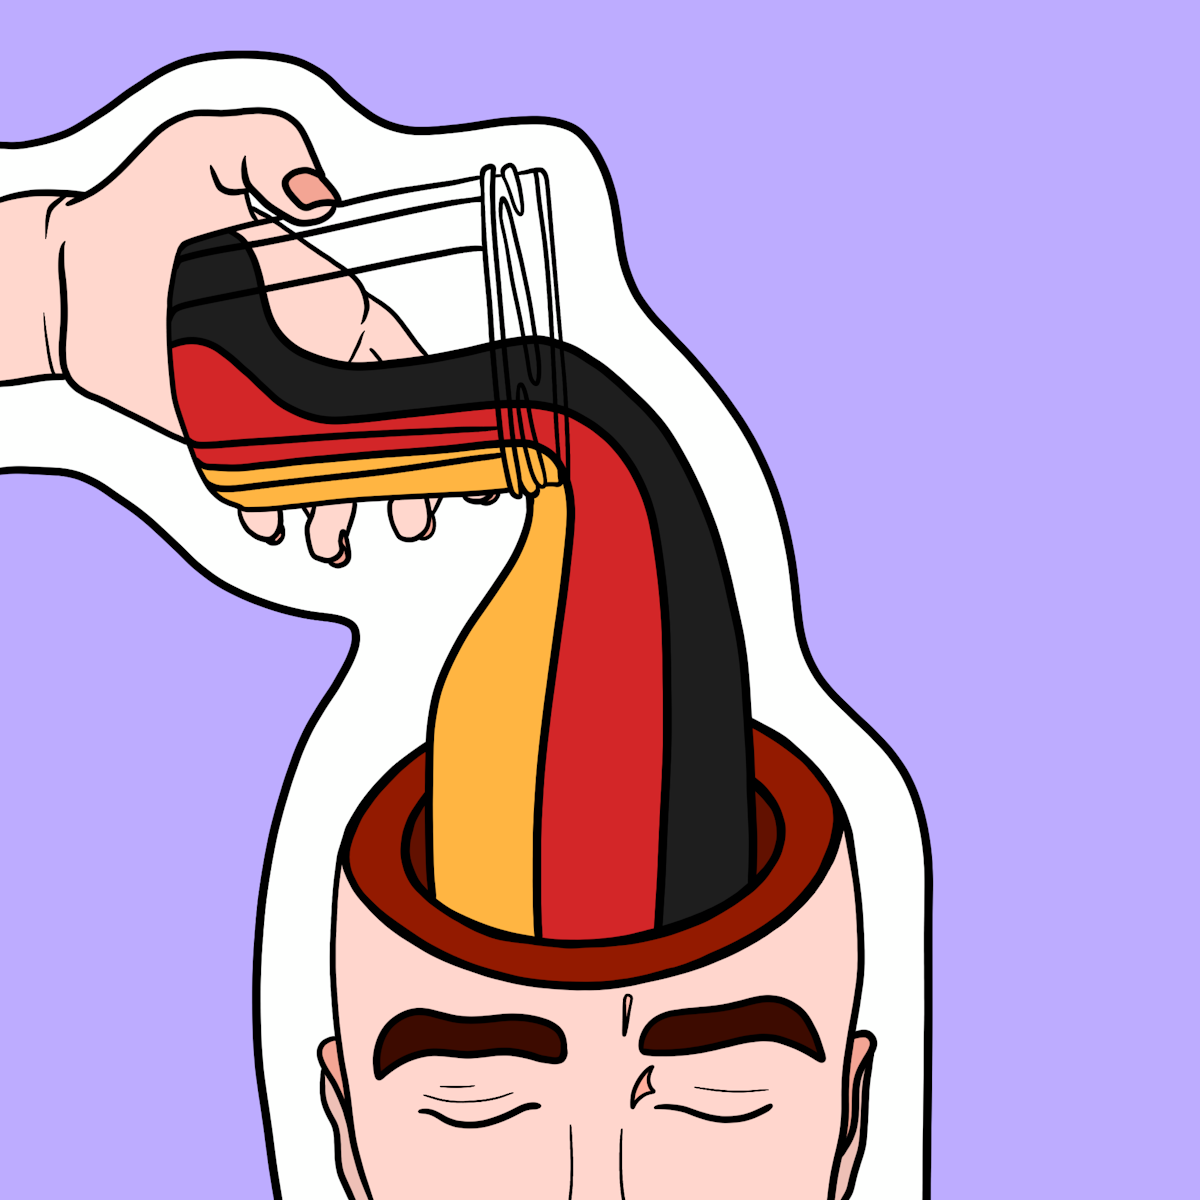 Illustration of a man pouring German knowledge into his brainm in order to learn German fast.